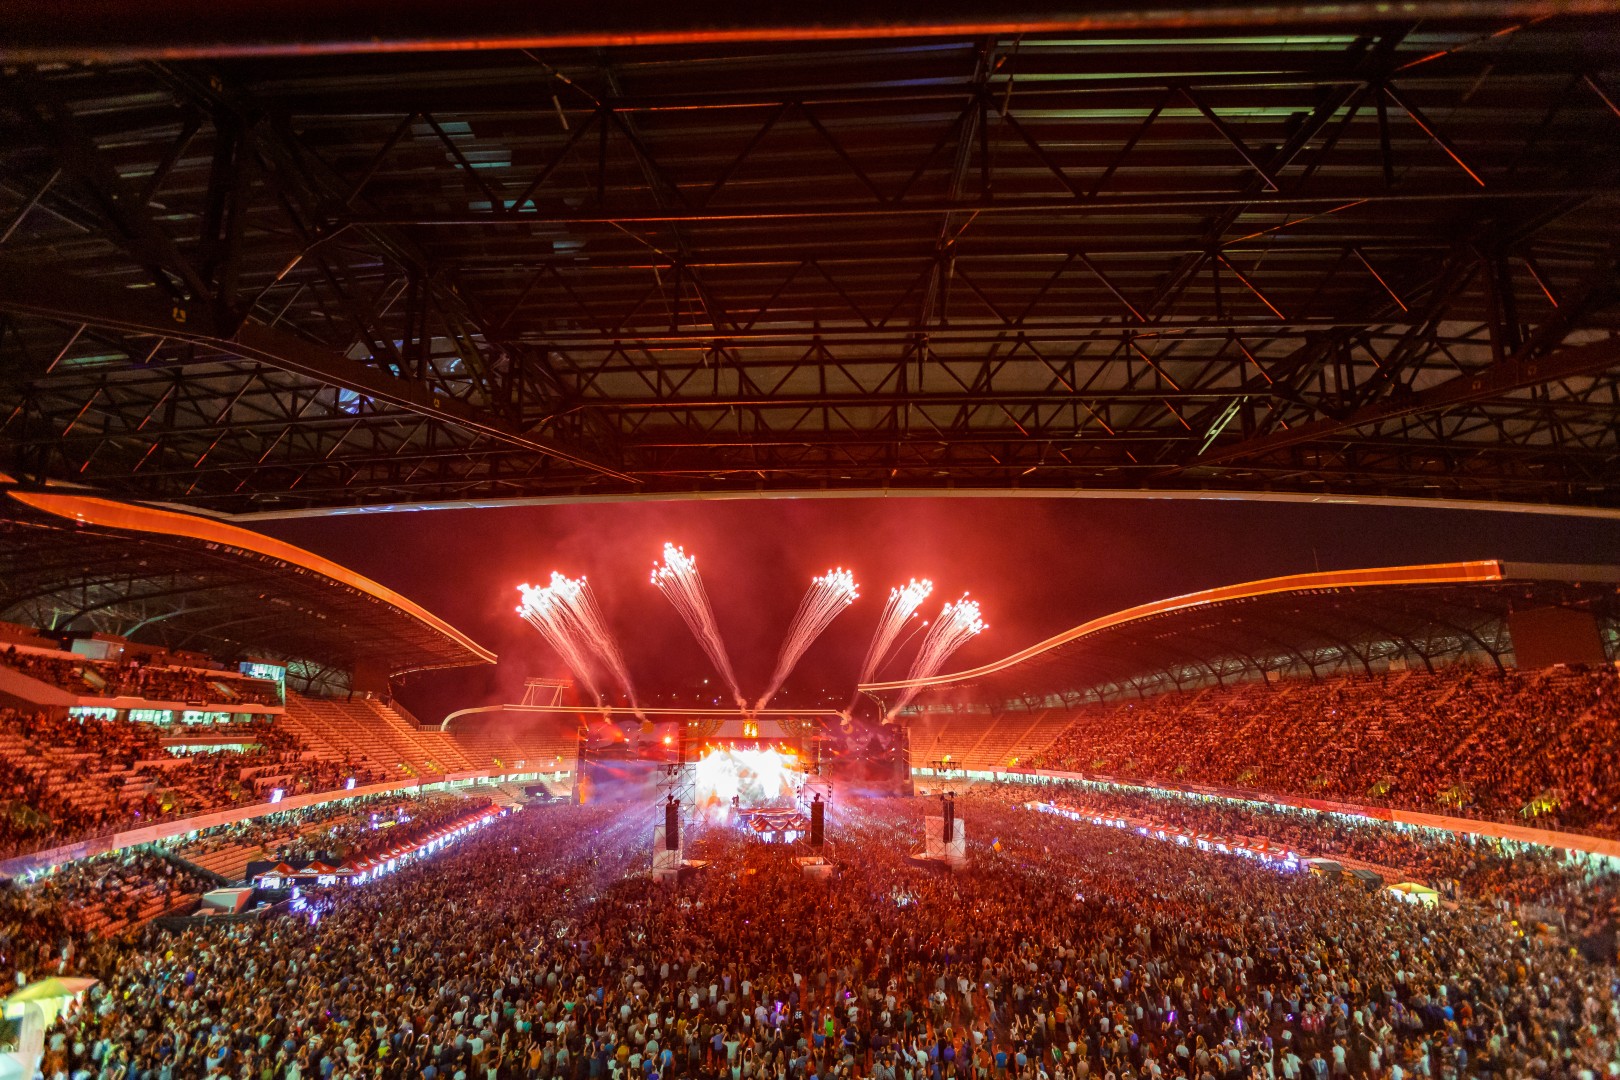 Public at Cluj Arena in Bucharest on August 2, 2015 (79dee9914d)